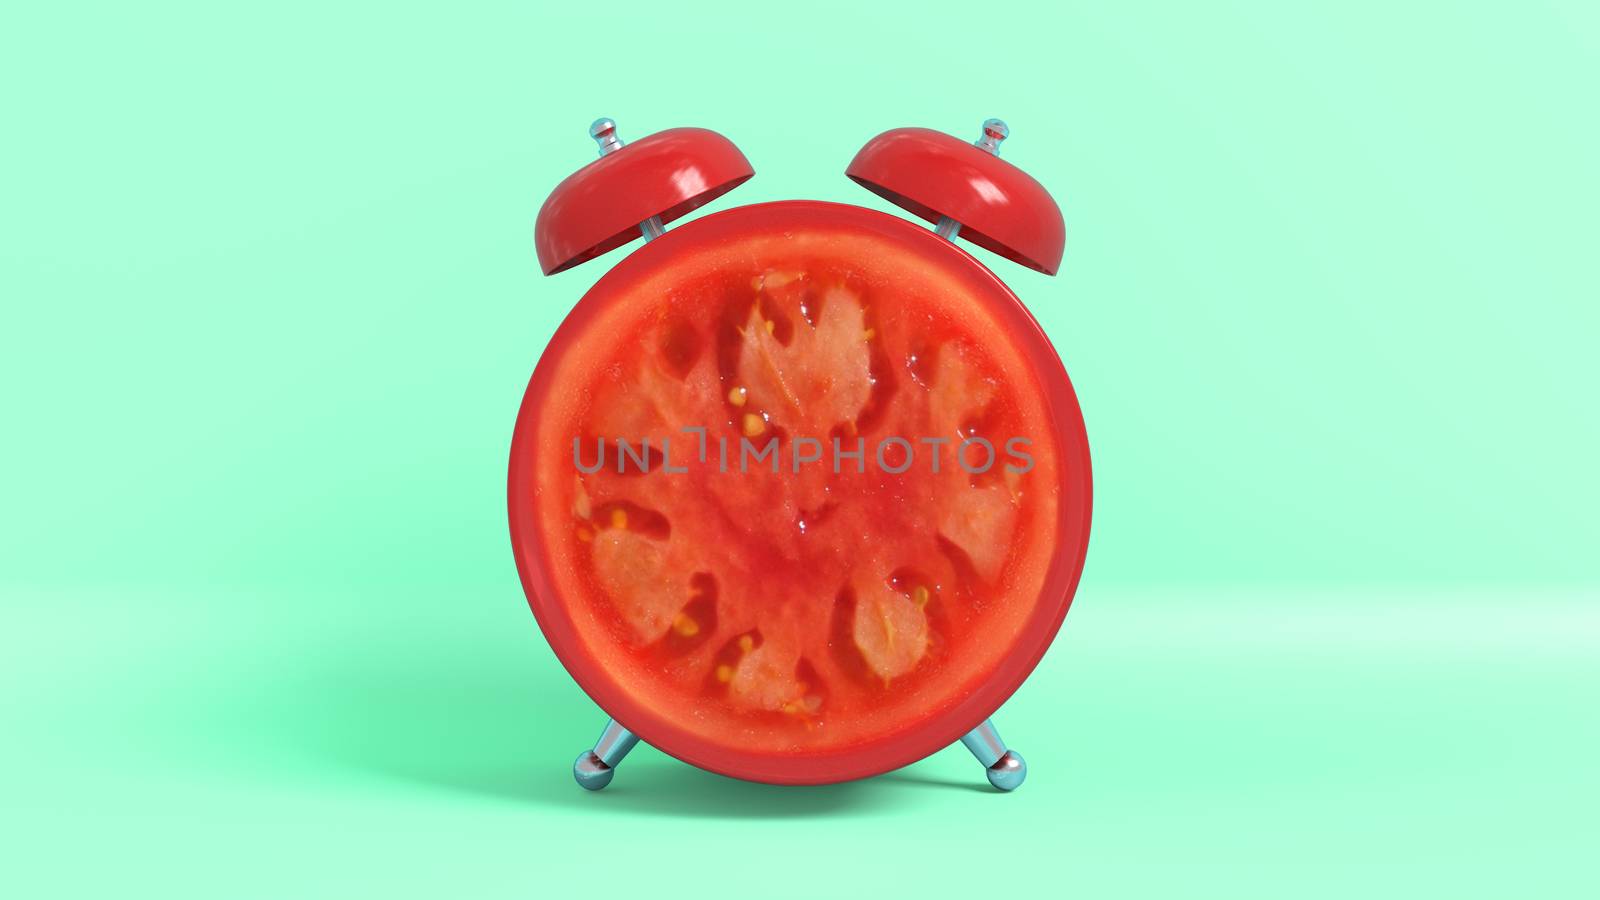 Wake up vintage morning shaped tomato. Concept illustrating that it is time to take vitamins. 3D rendering.